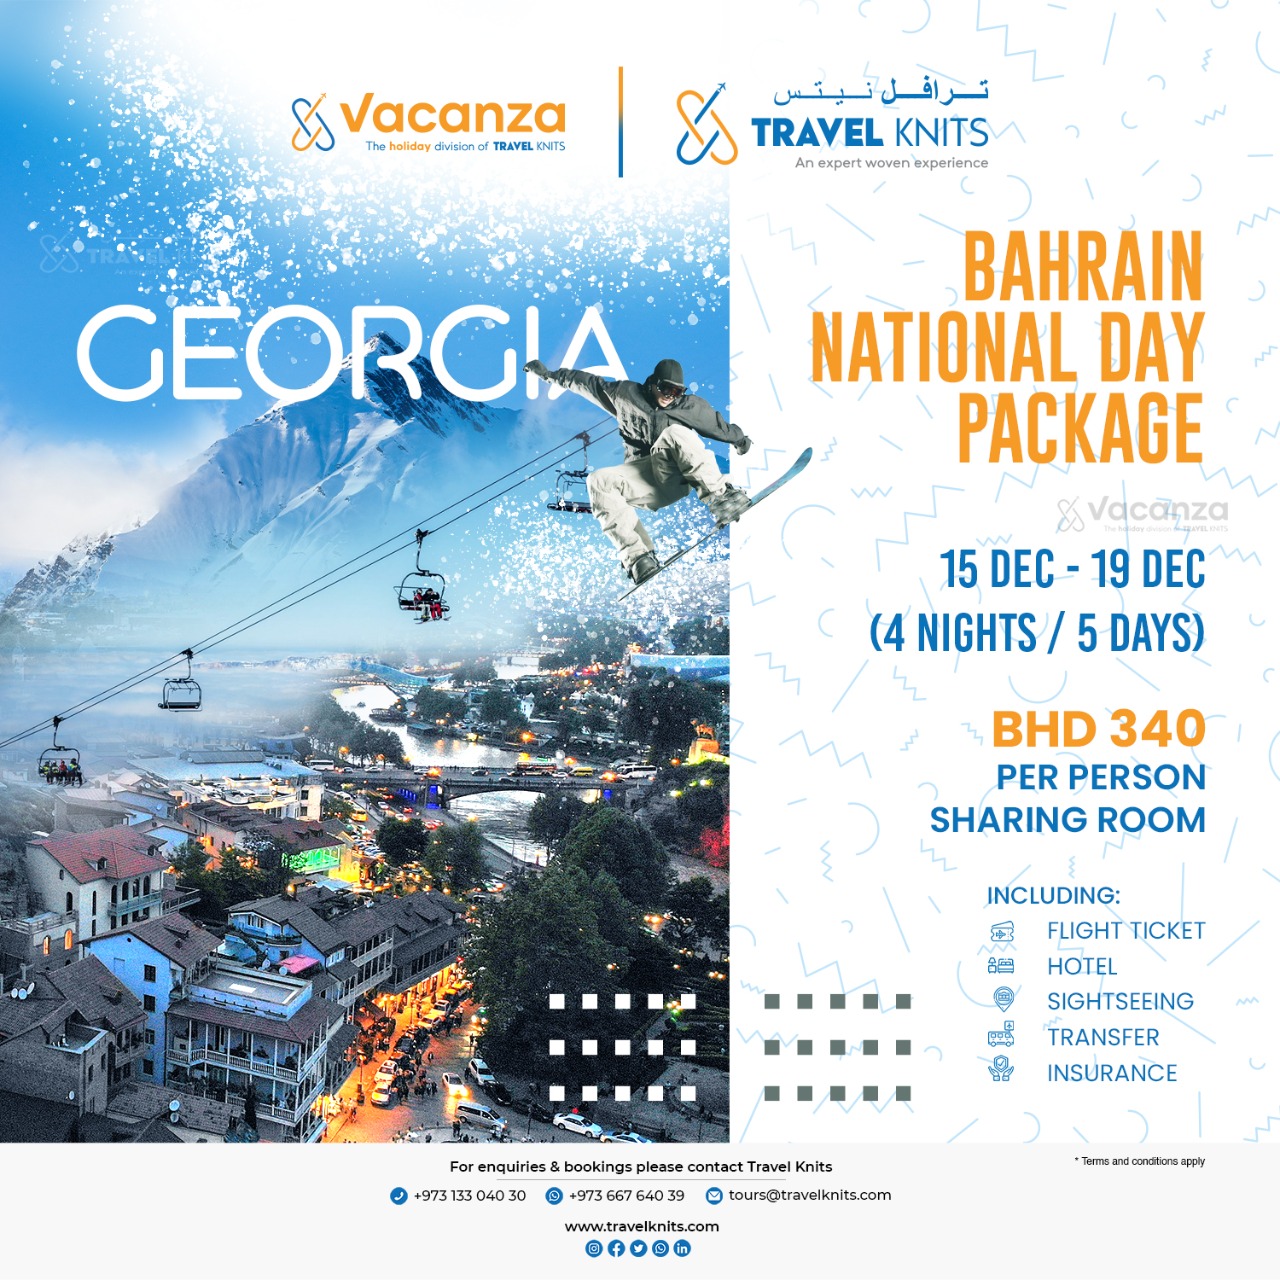 Bahrain national day georgiaTour Packages - Book honeymoon ,family,adventure tour packages to Bahrain national day georgia|Travel Knits